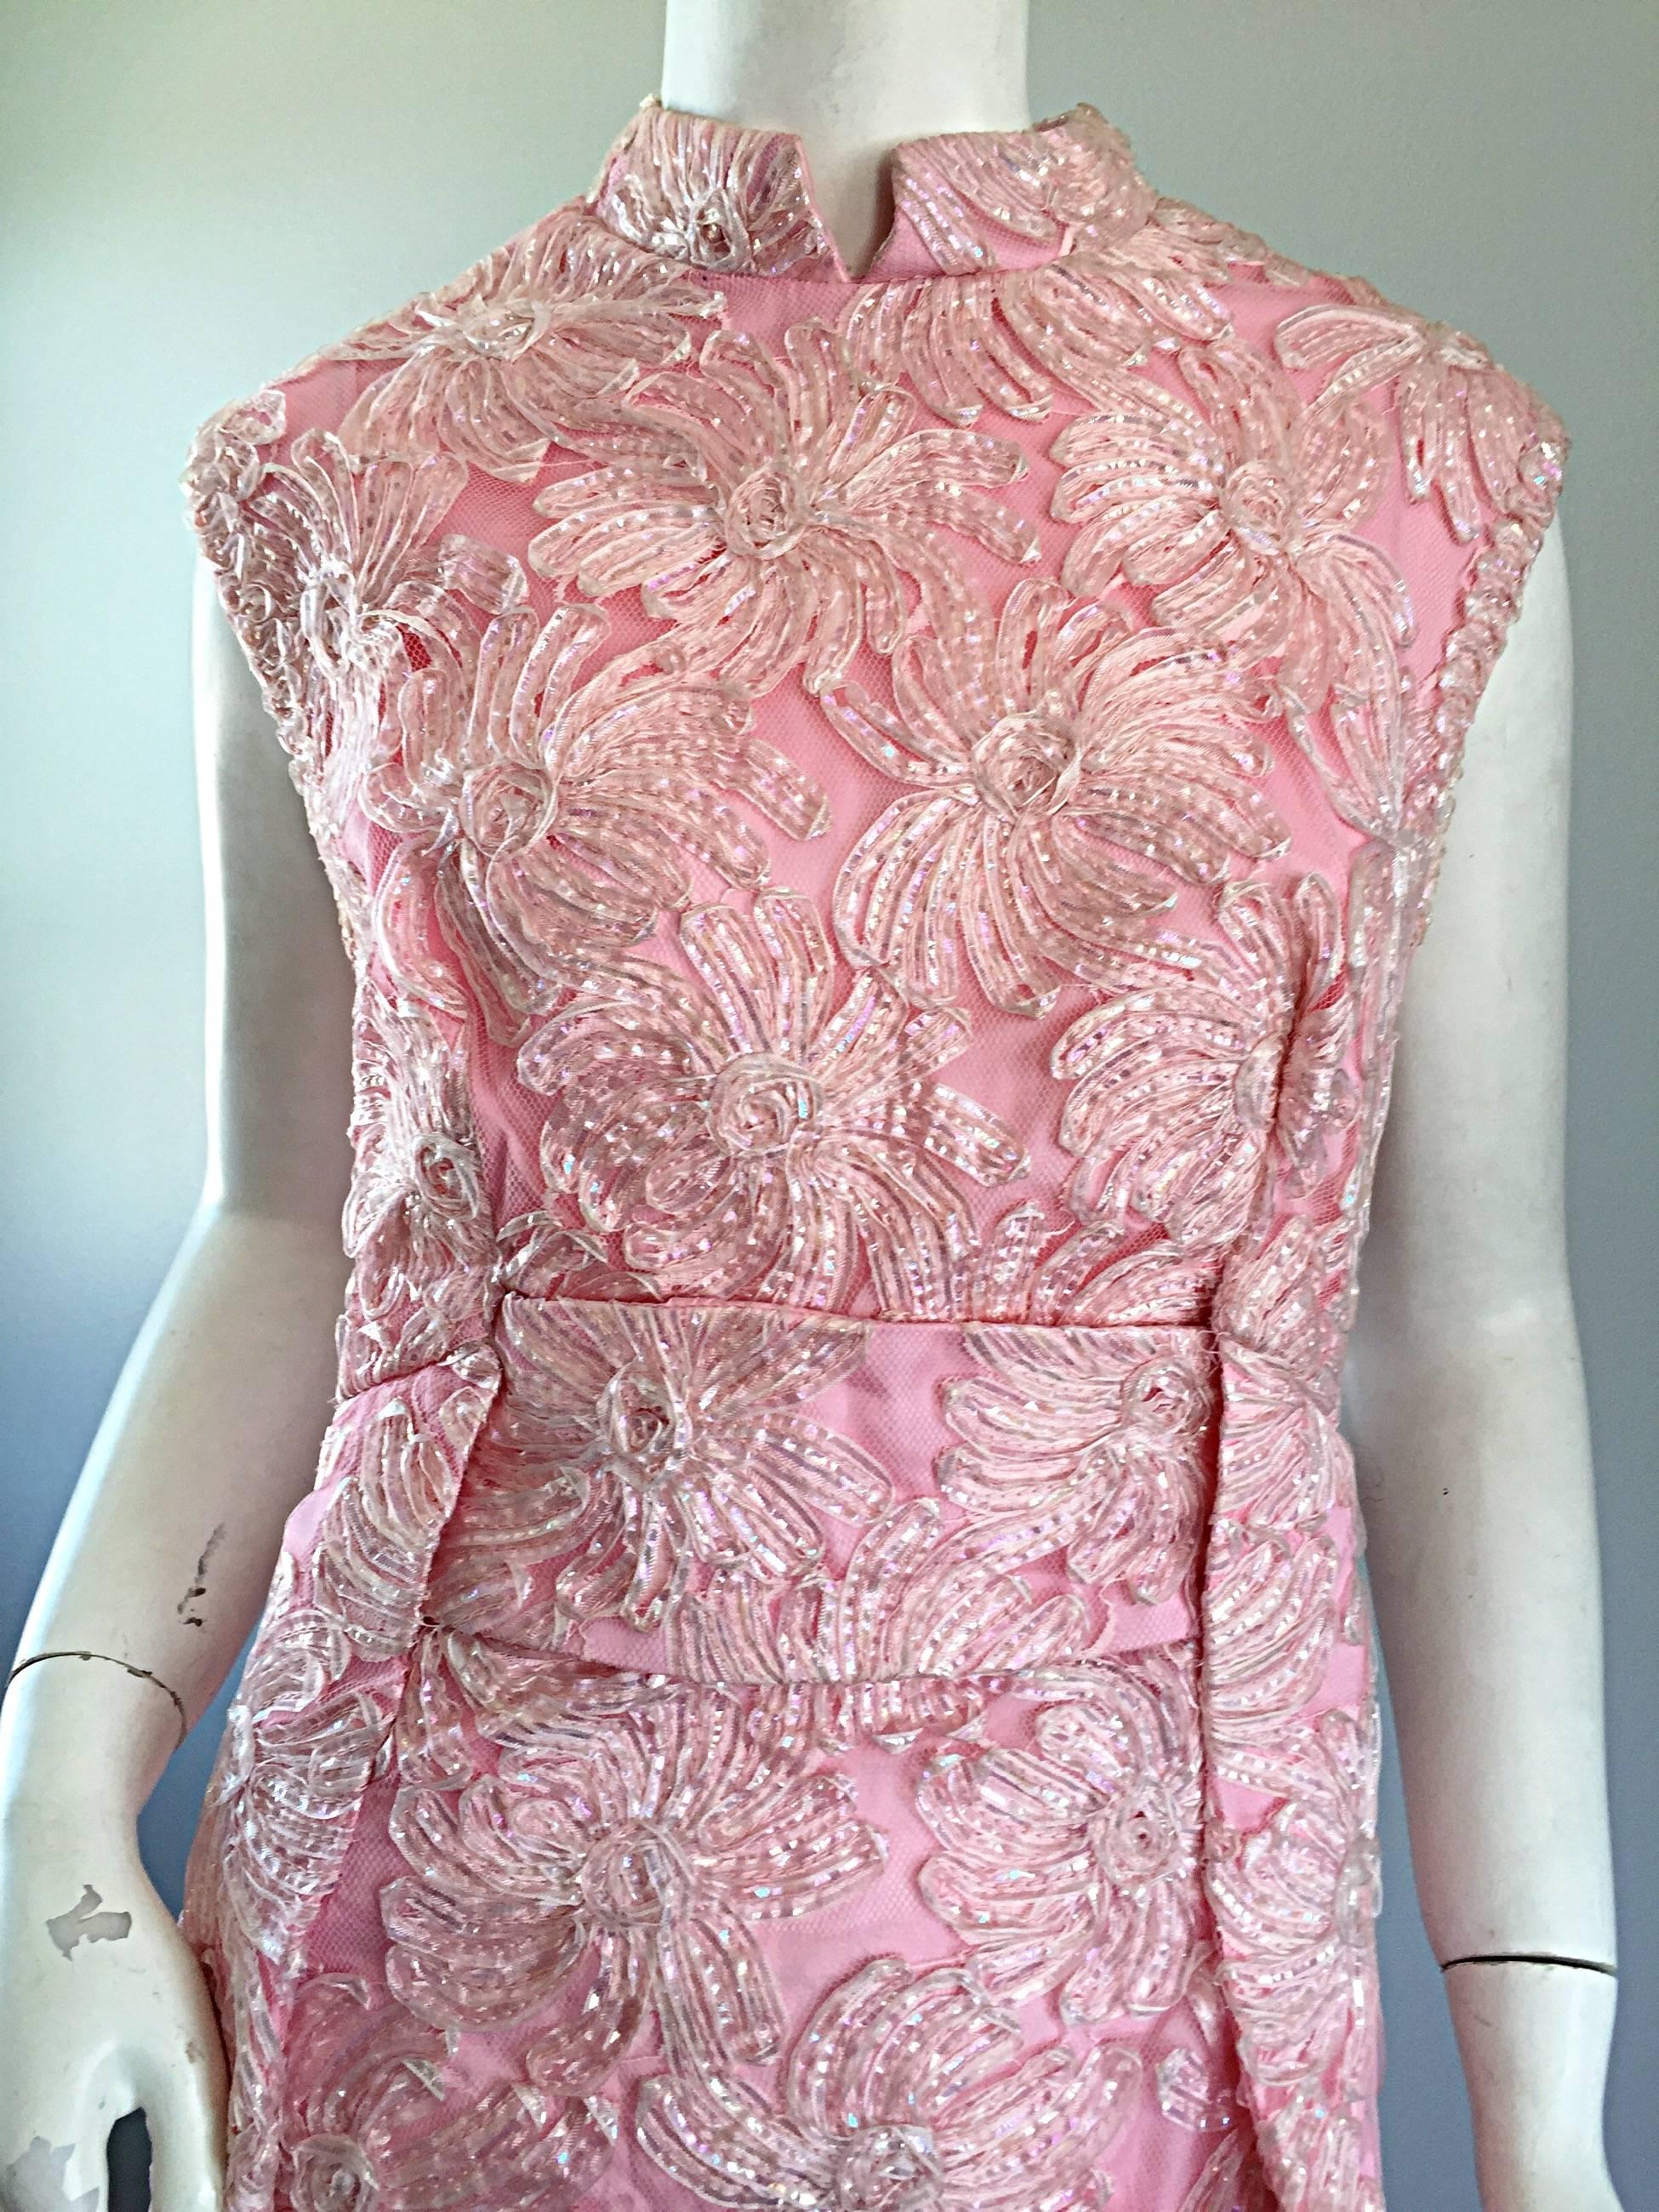 Incredible vintage 1960s / 60s full length pink silk + raffia evening gown! Channels the late great Jackie Kennedy - Onasis! Light pink silk gown, embroidered with iridescent raffia throughout. Two flattering pleats on either side of this column